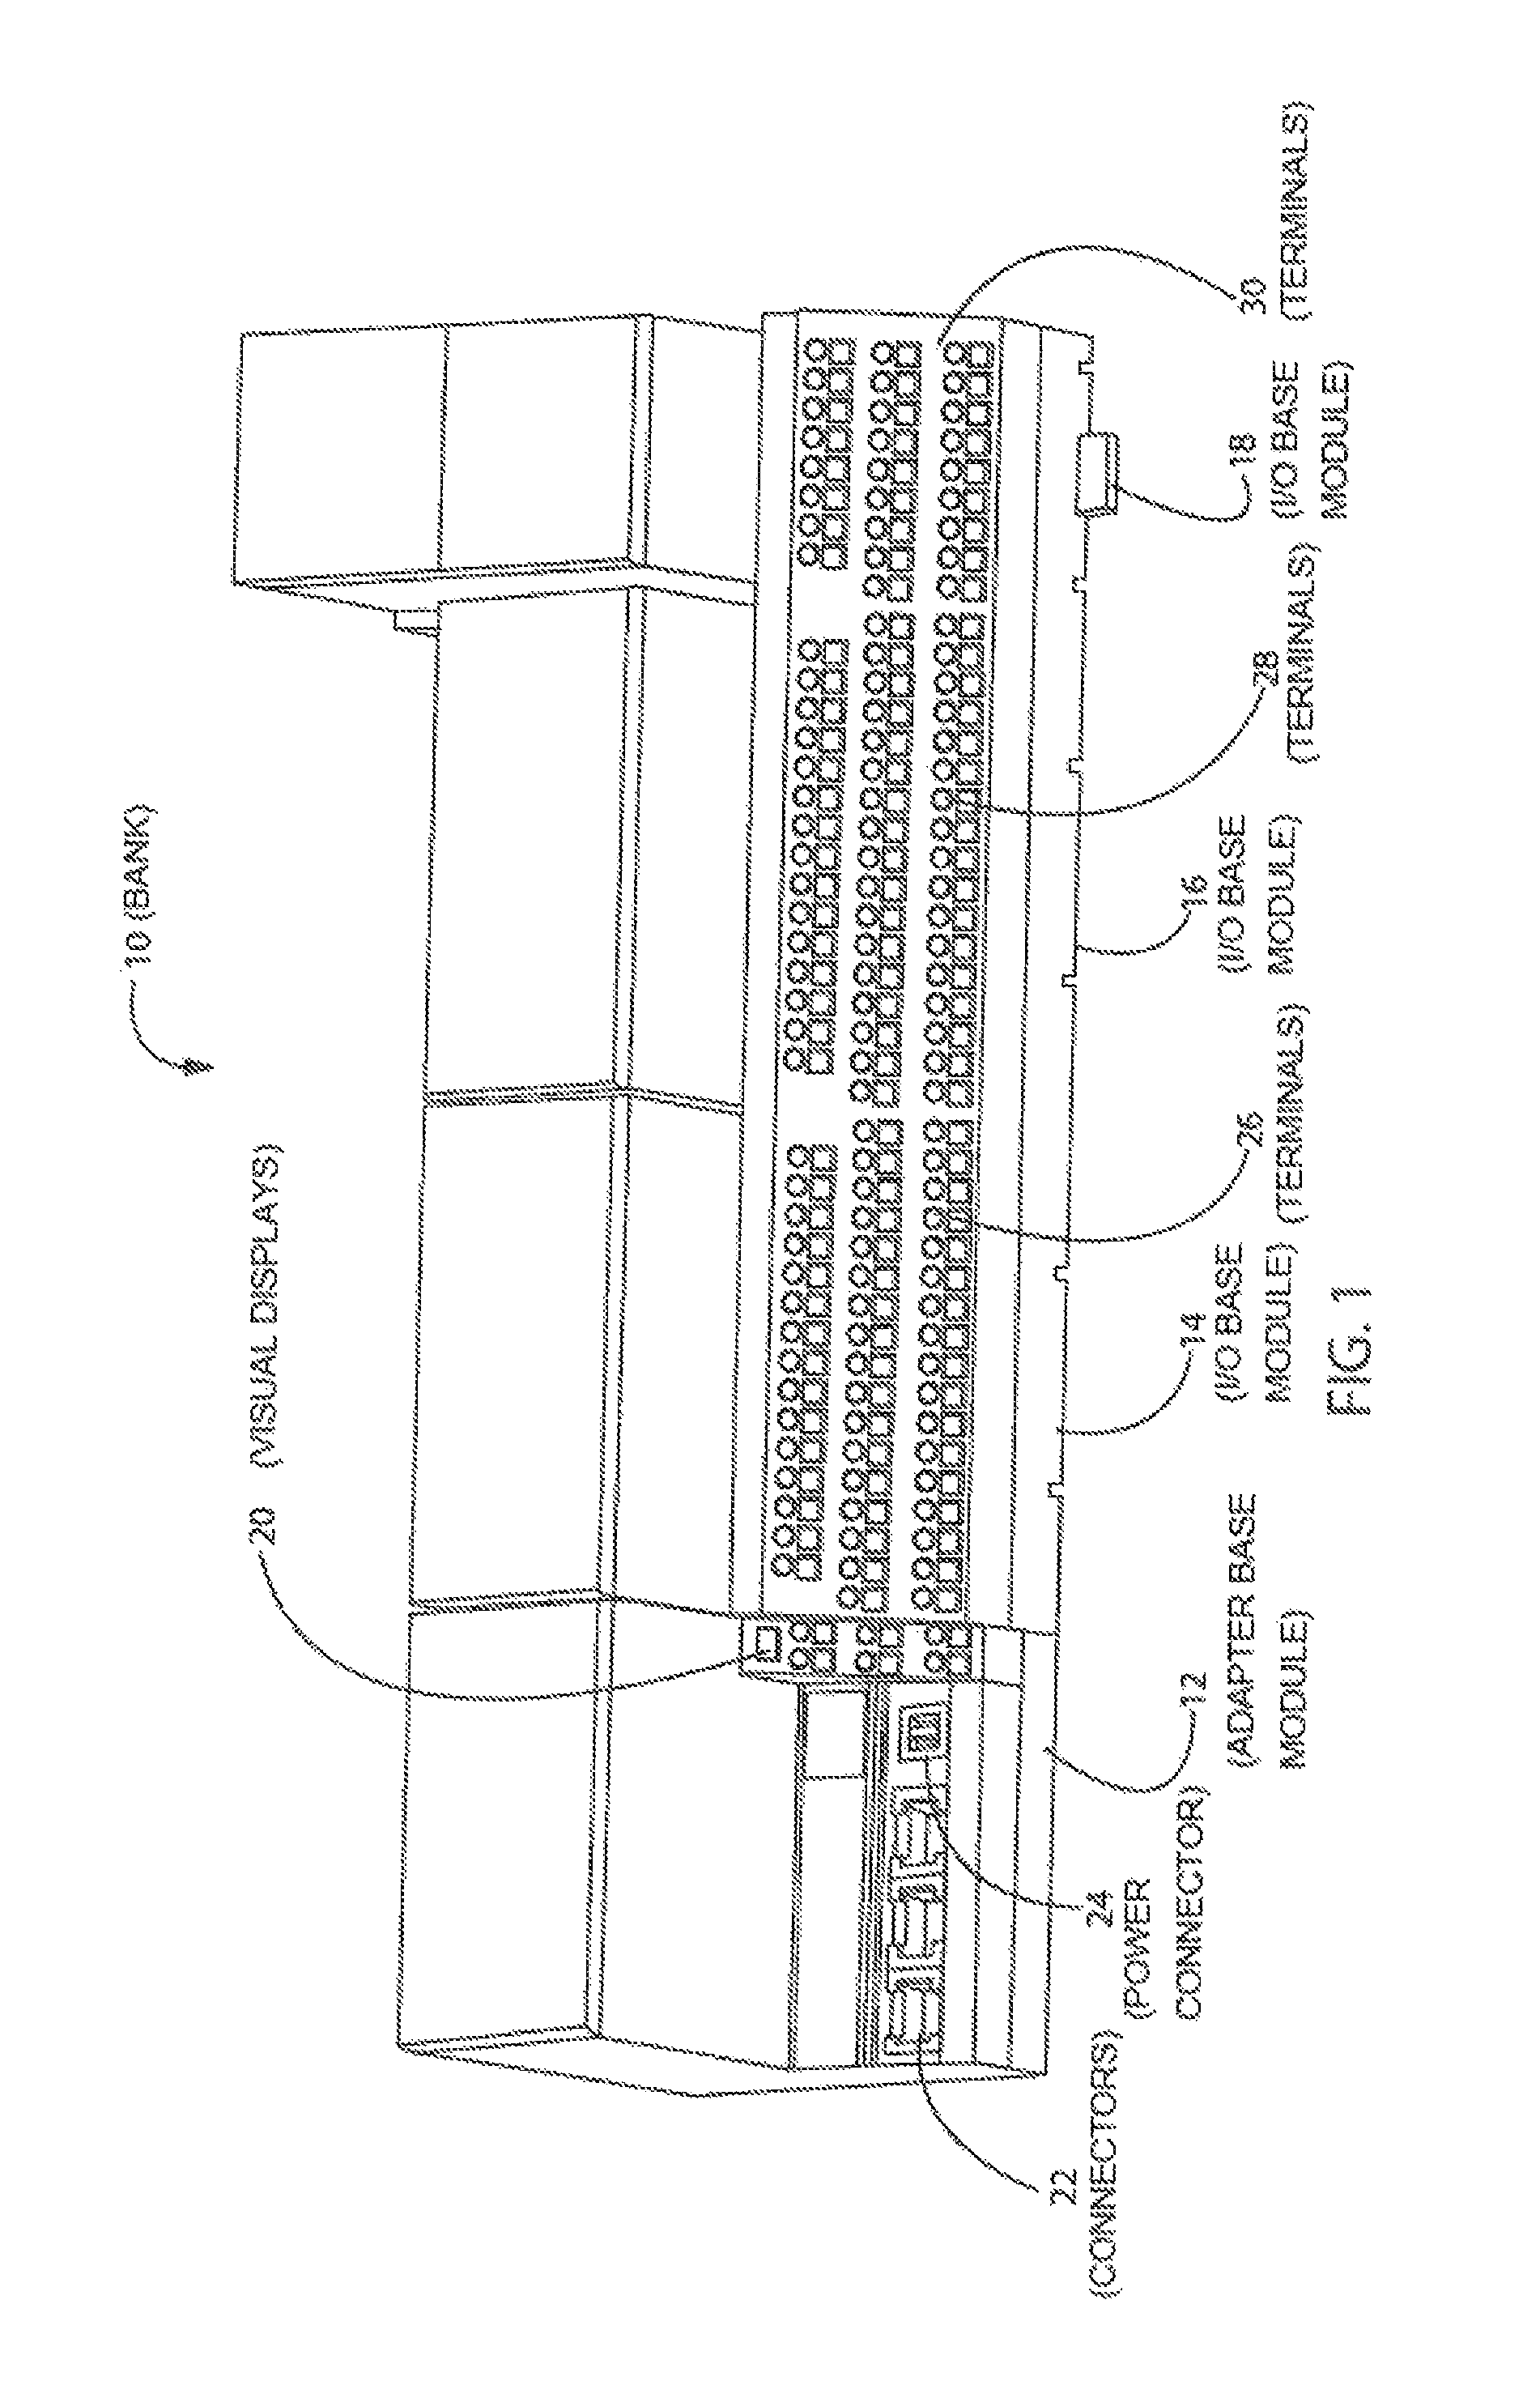 High availability device level ring backplane